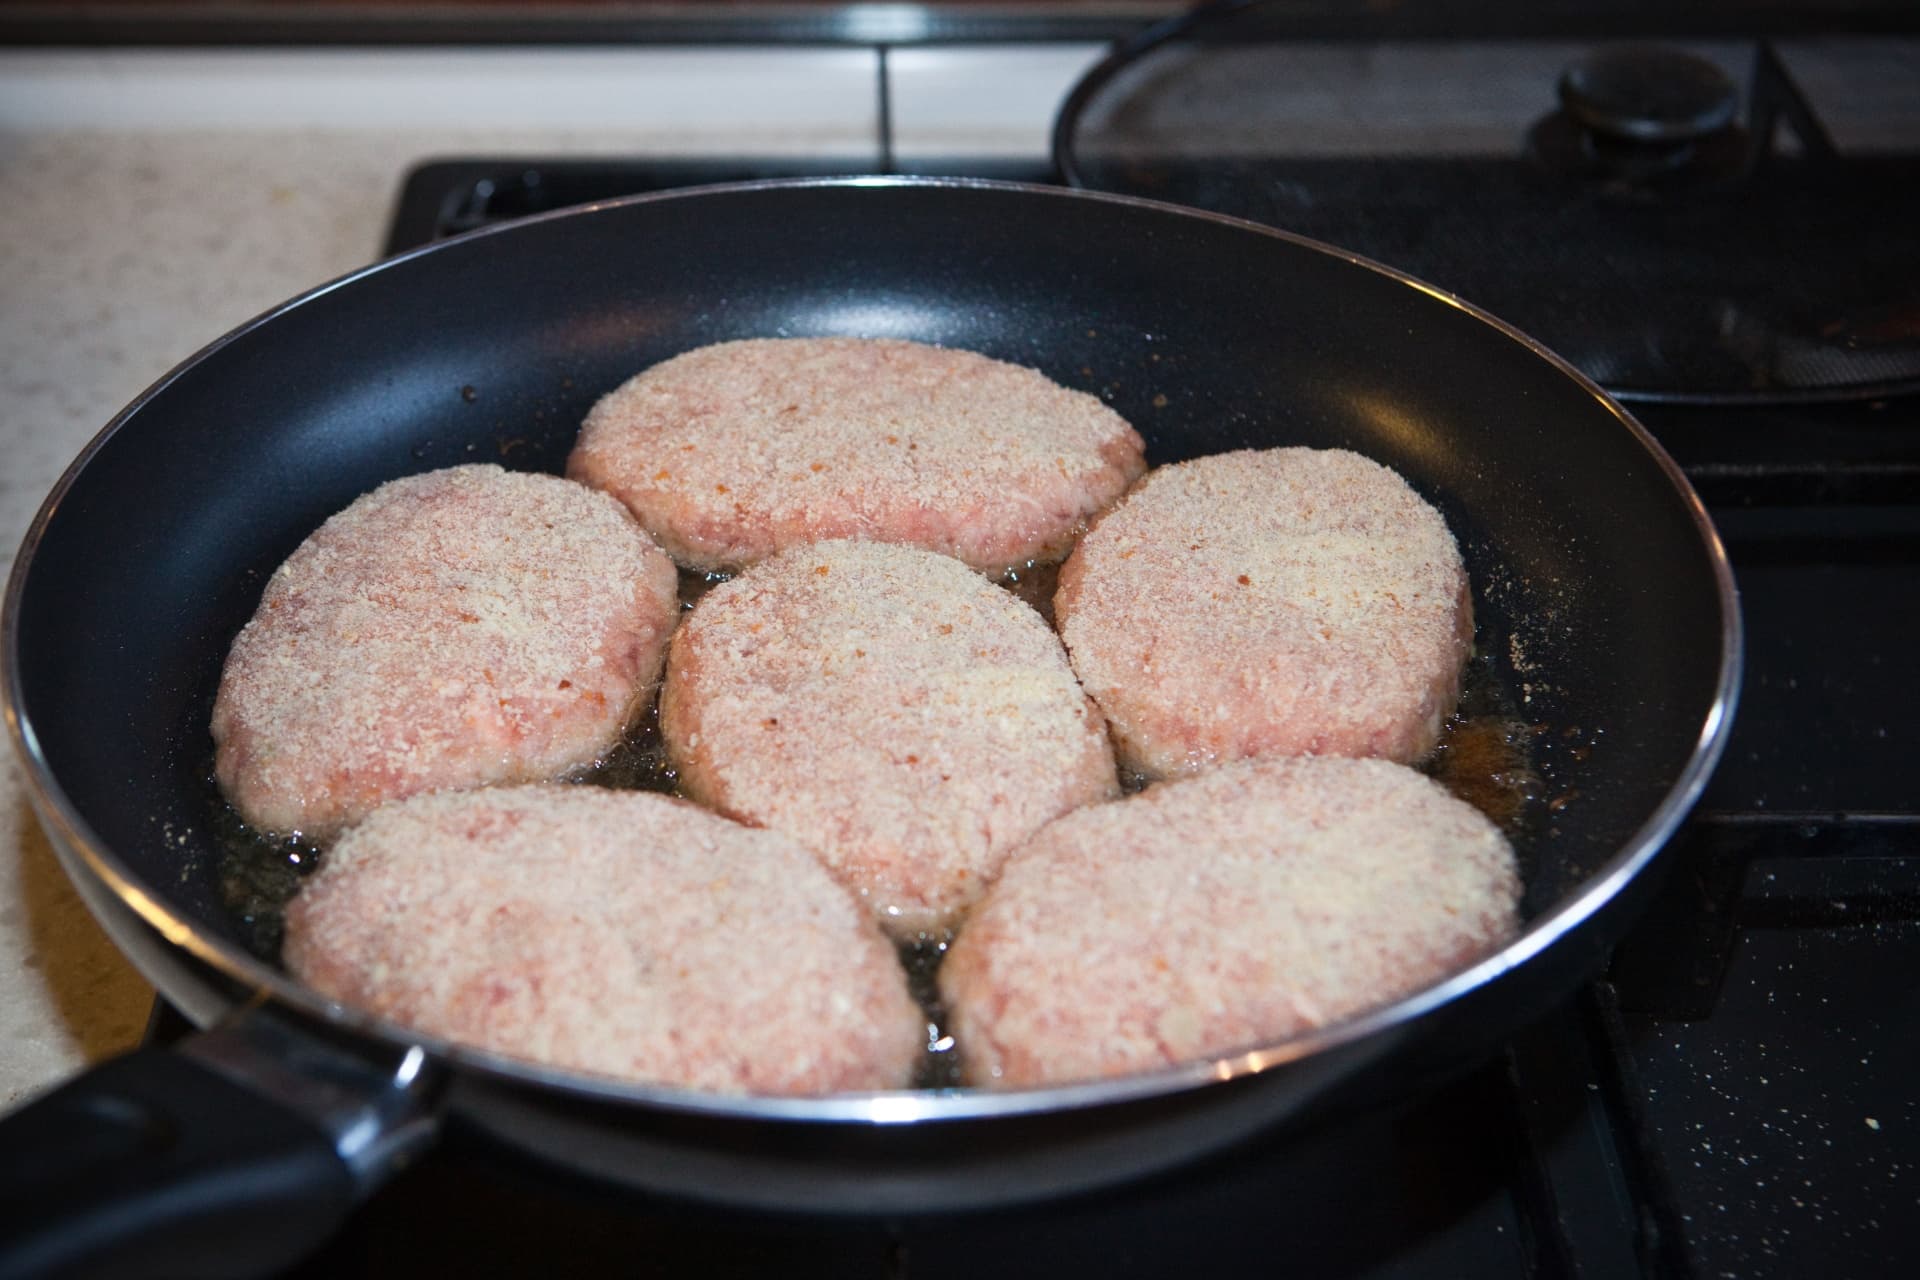 Kotlety (Fried Meat Burgers)